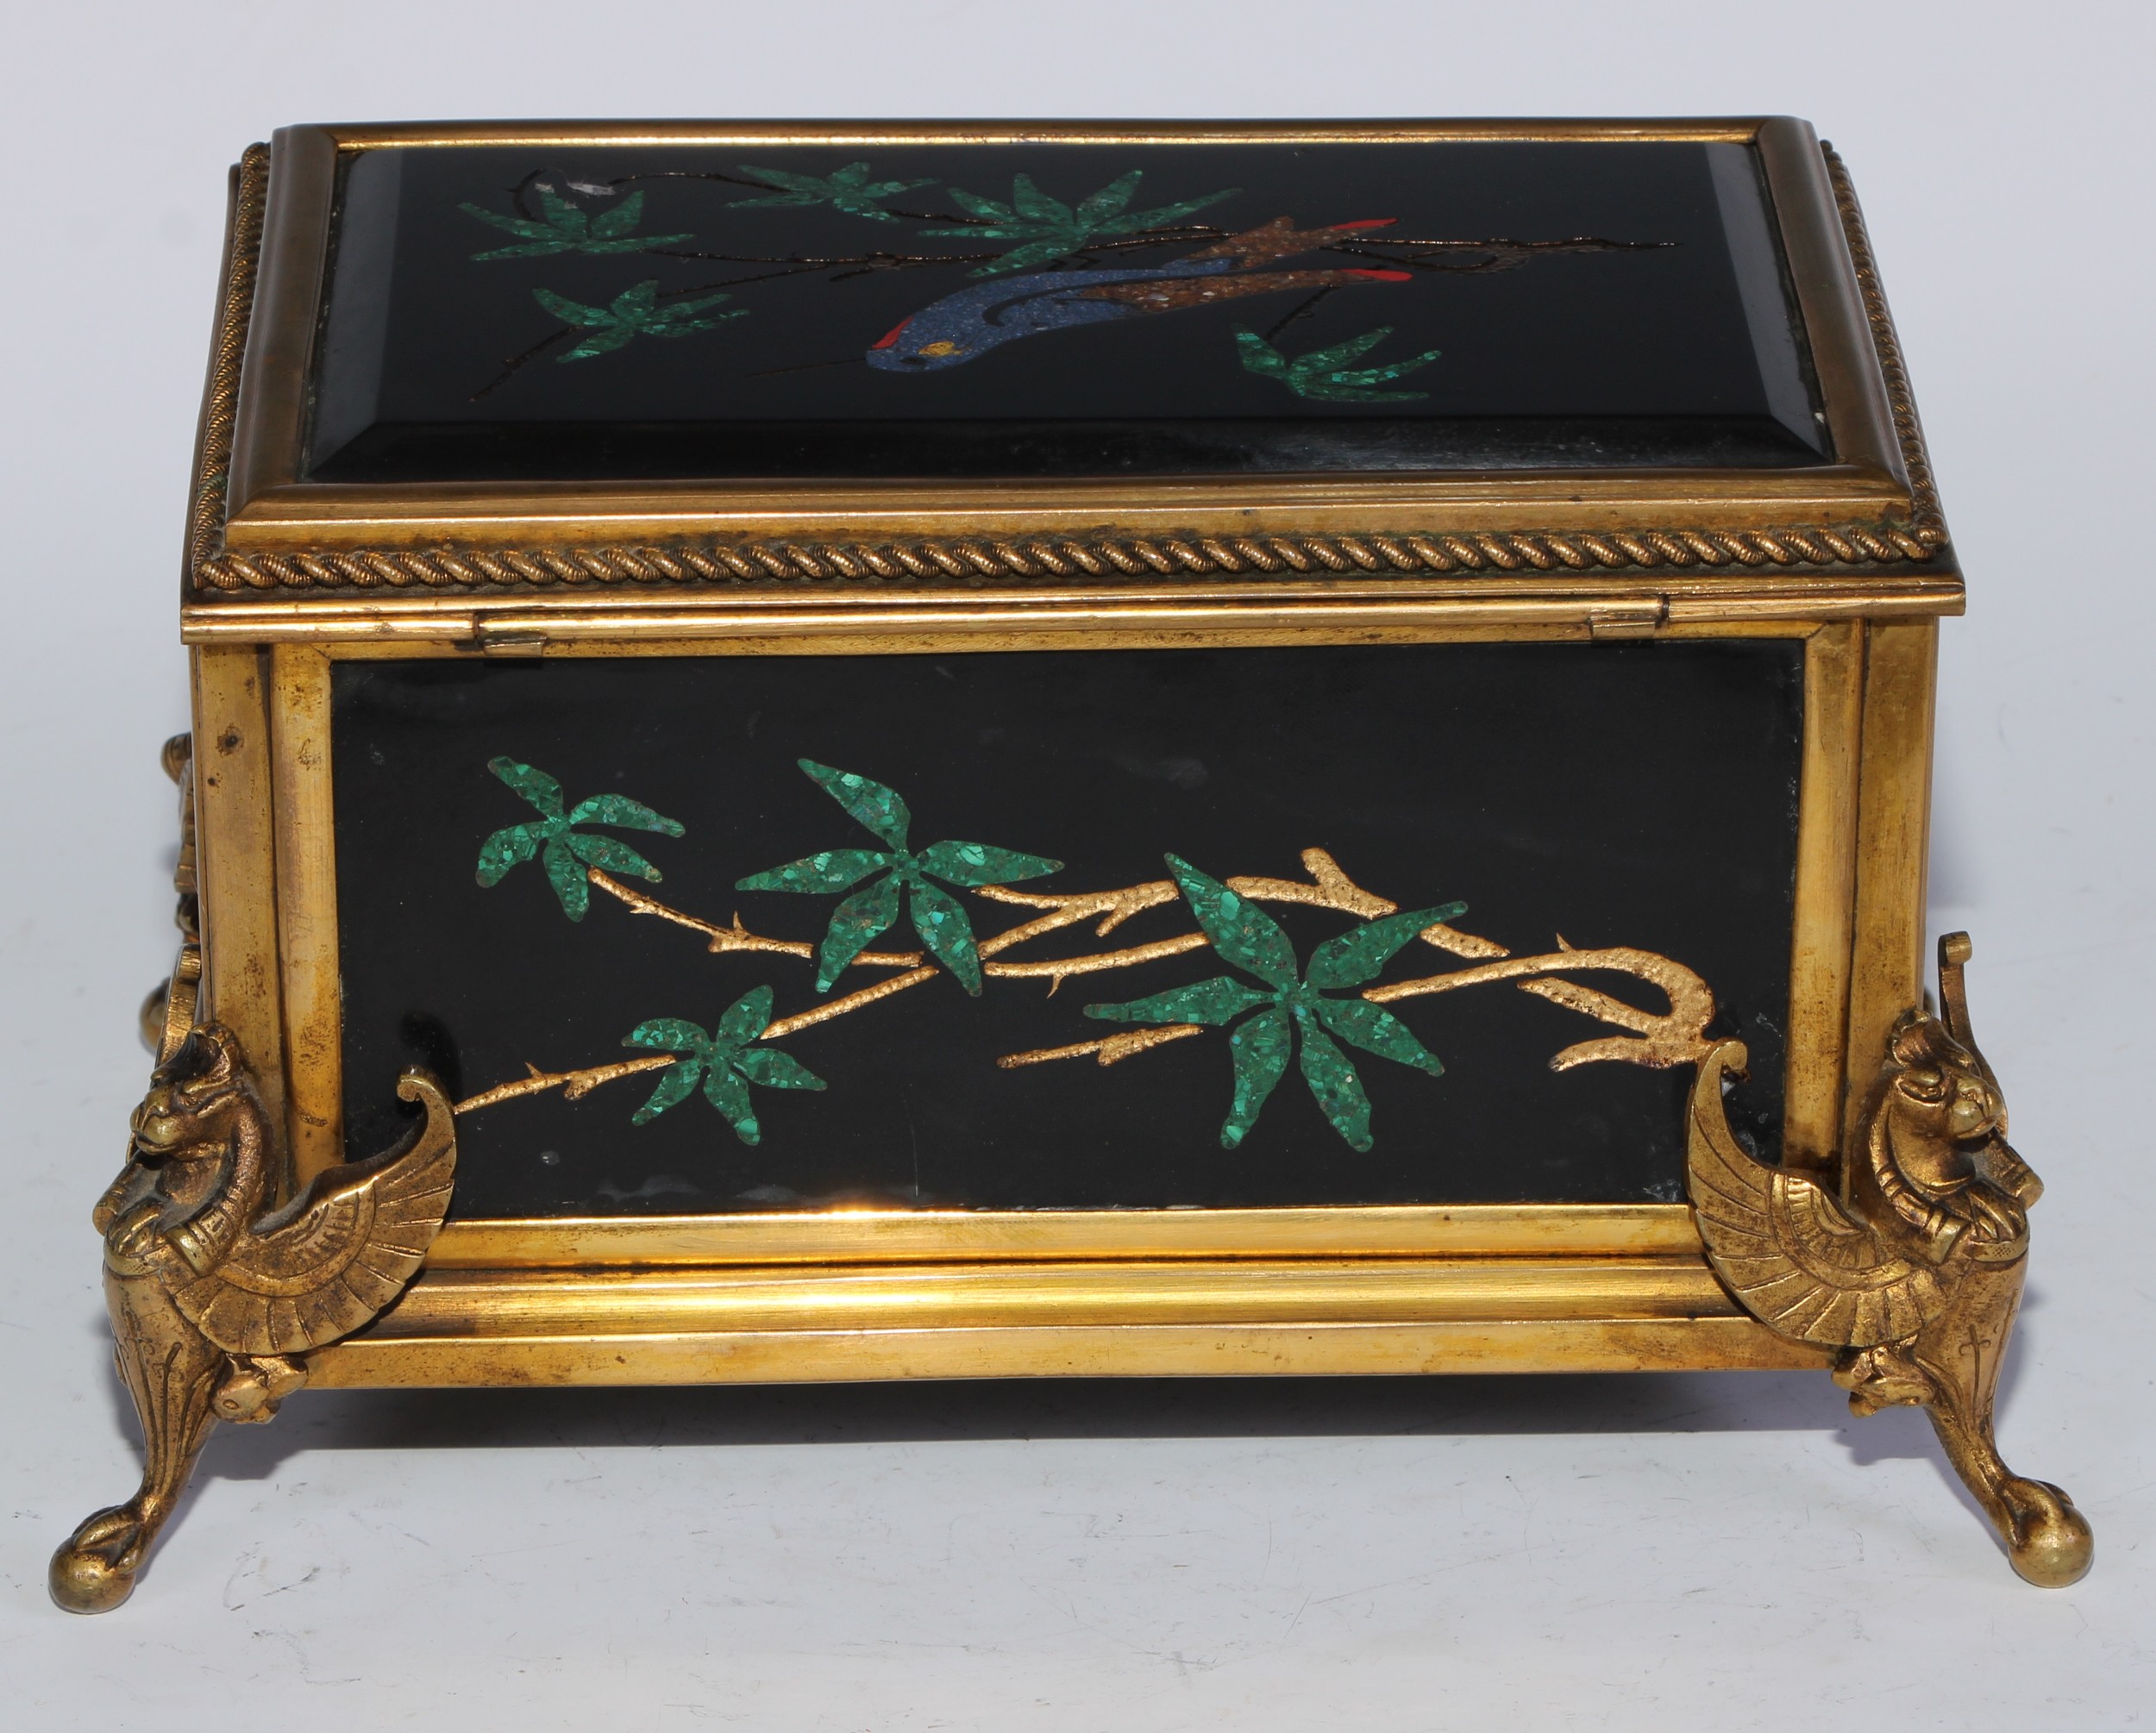 A 19th century ormolu and pietra dura casket, the top, front, sides and back each set with panels of - Image 5 of 6